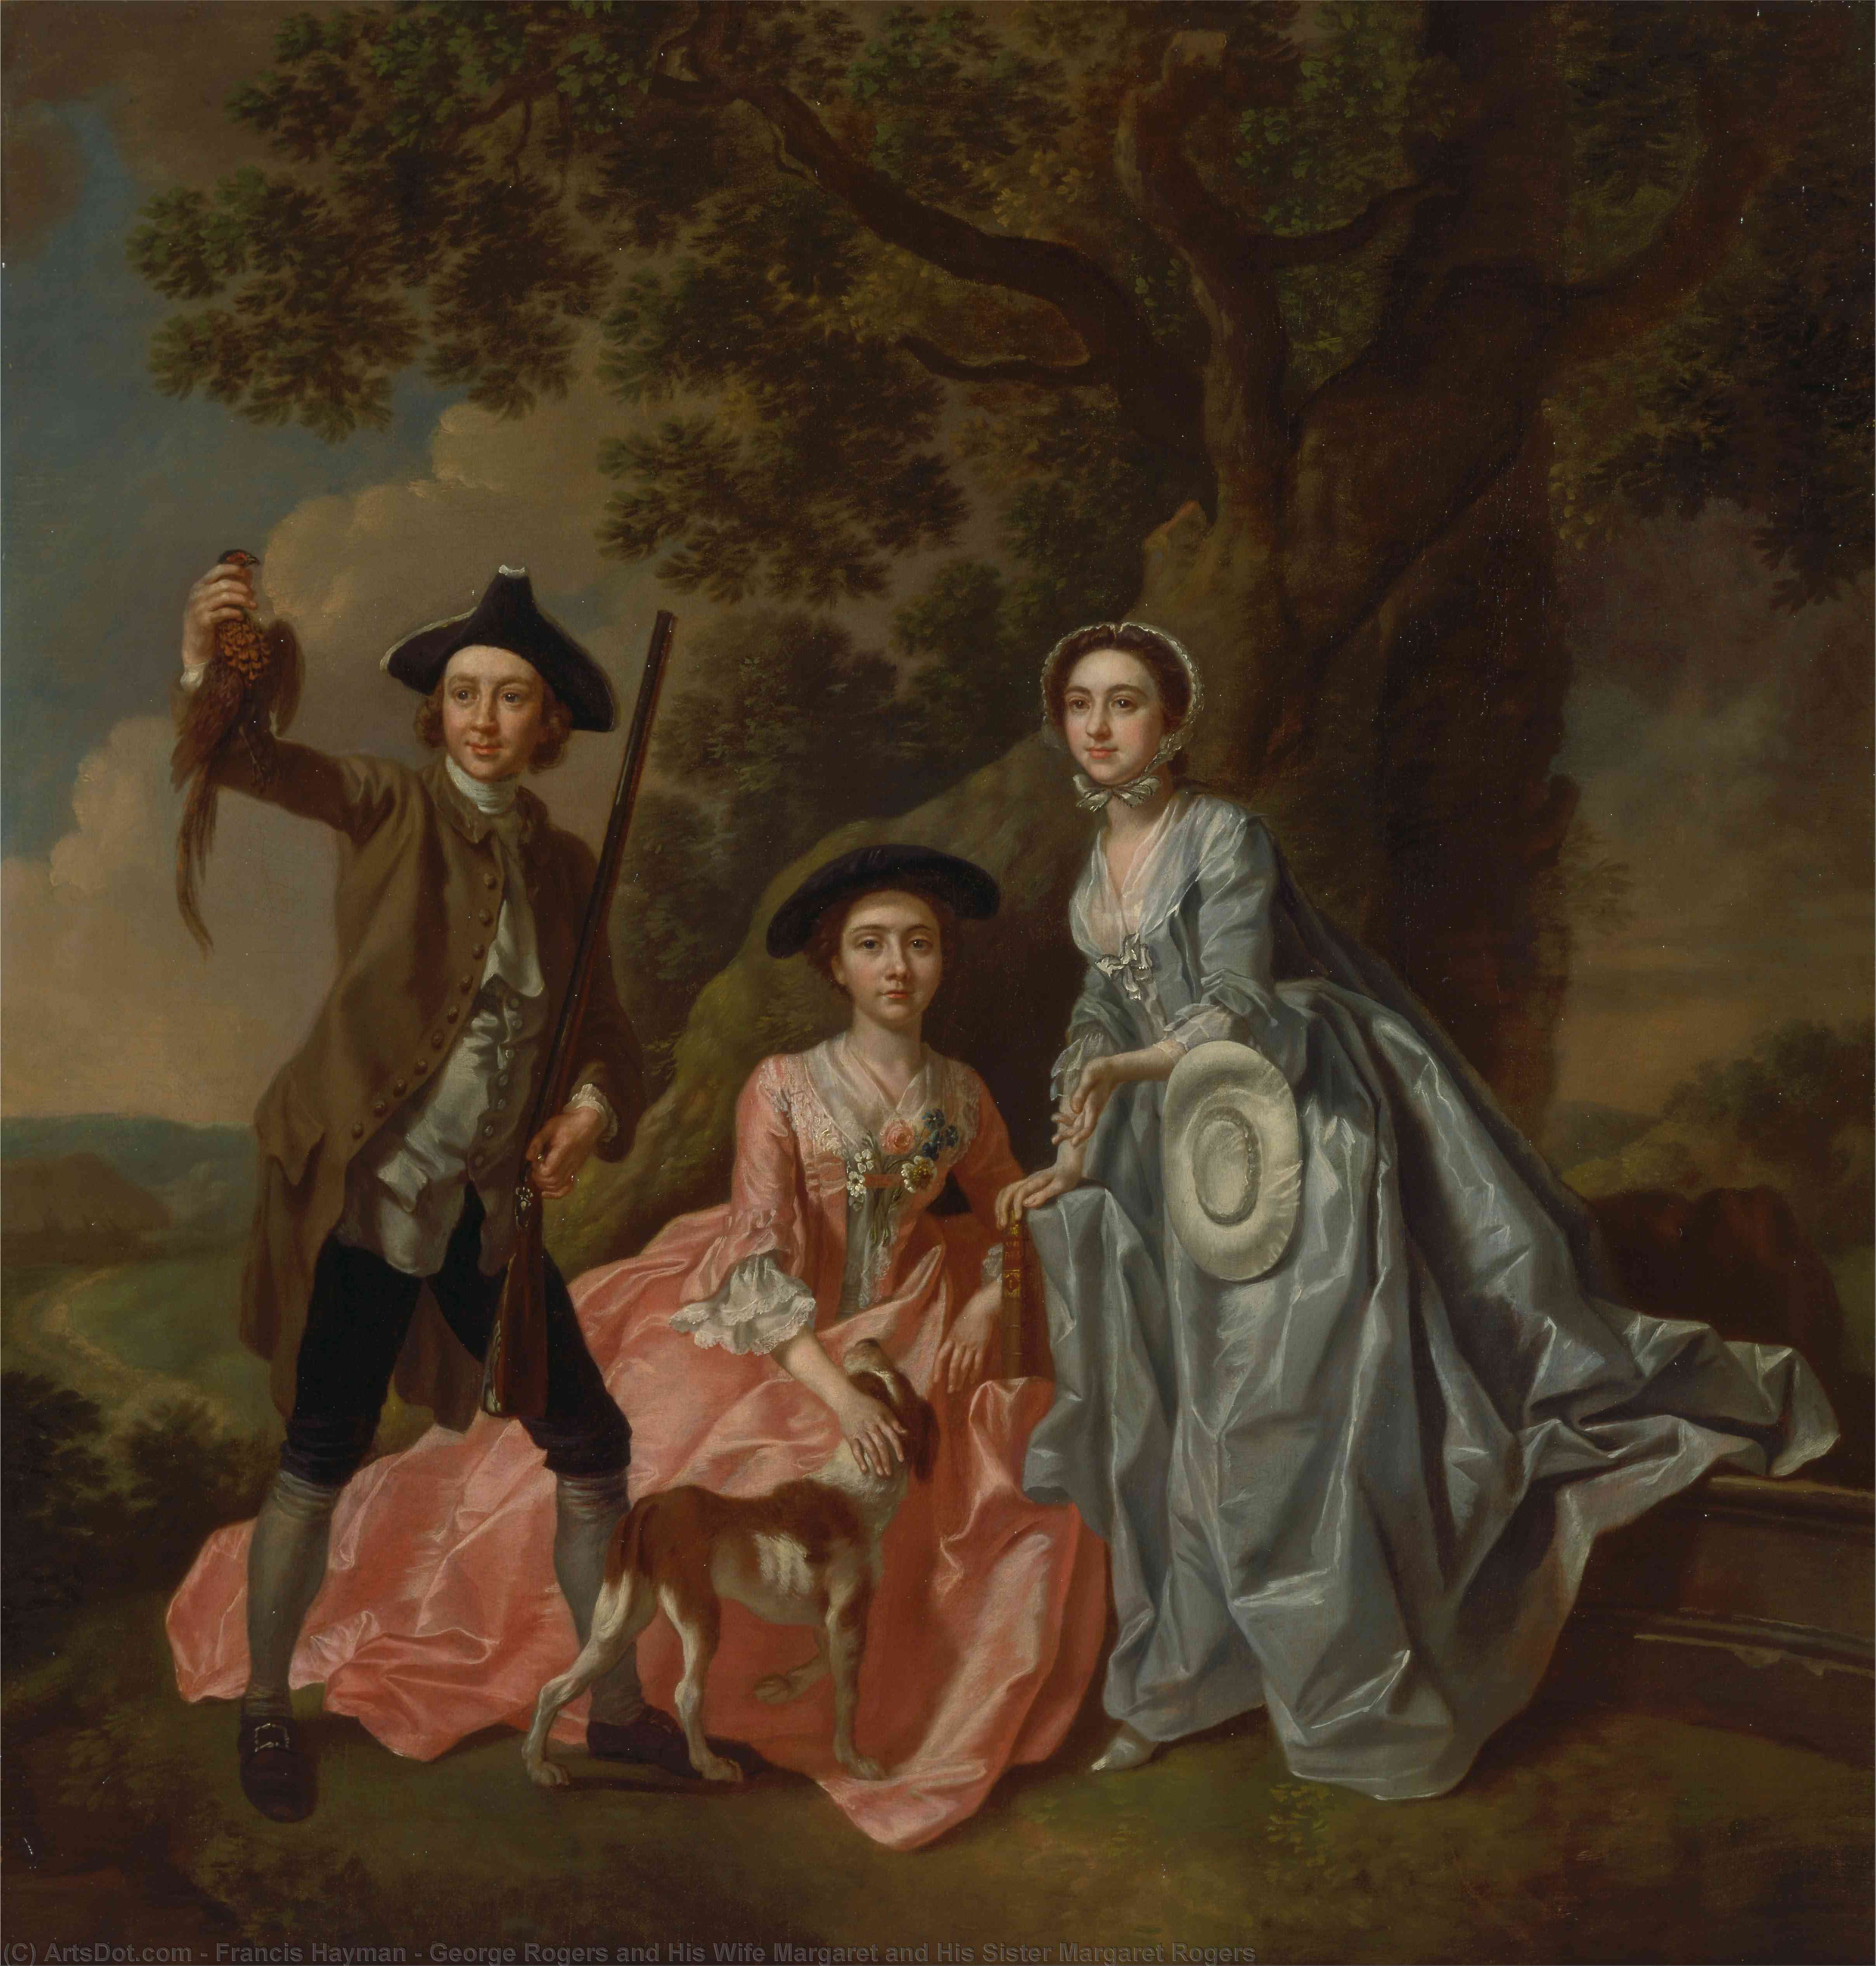 WikiOO.org - 백과 사전 - 회화, 삽화 Francis Hayman - George Rogers and His Wife Margaret and His Sister Margaret Rogers